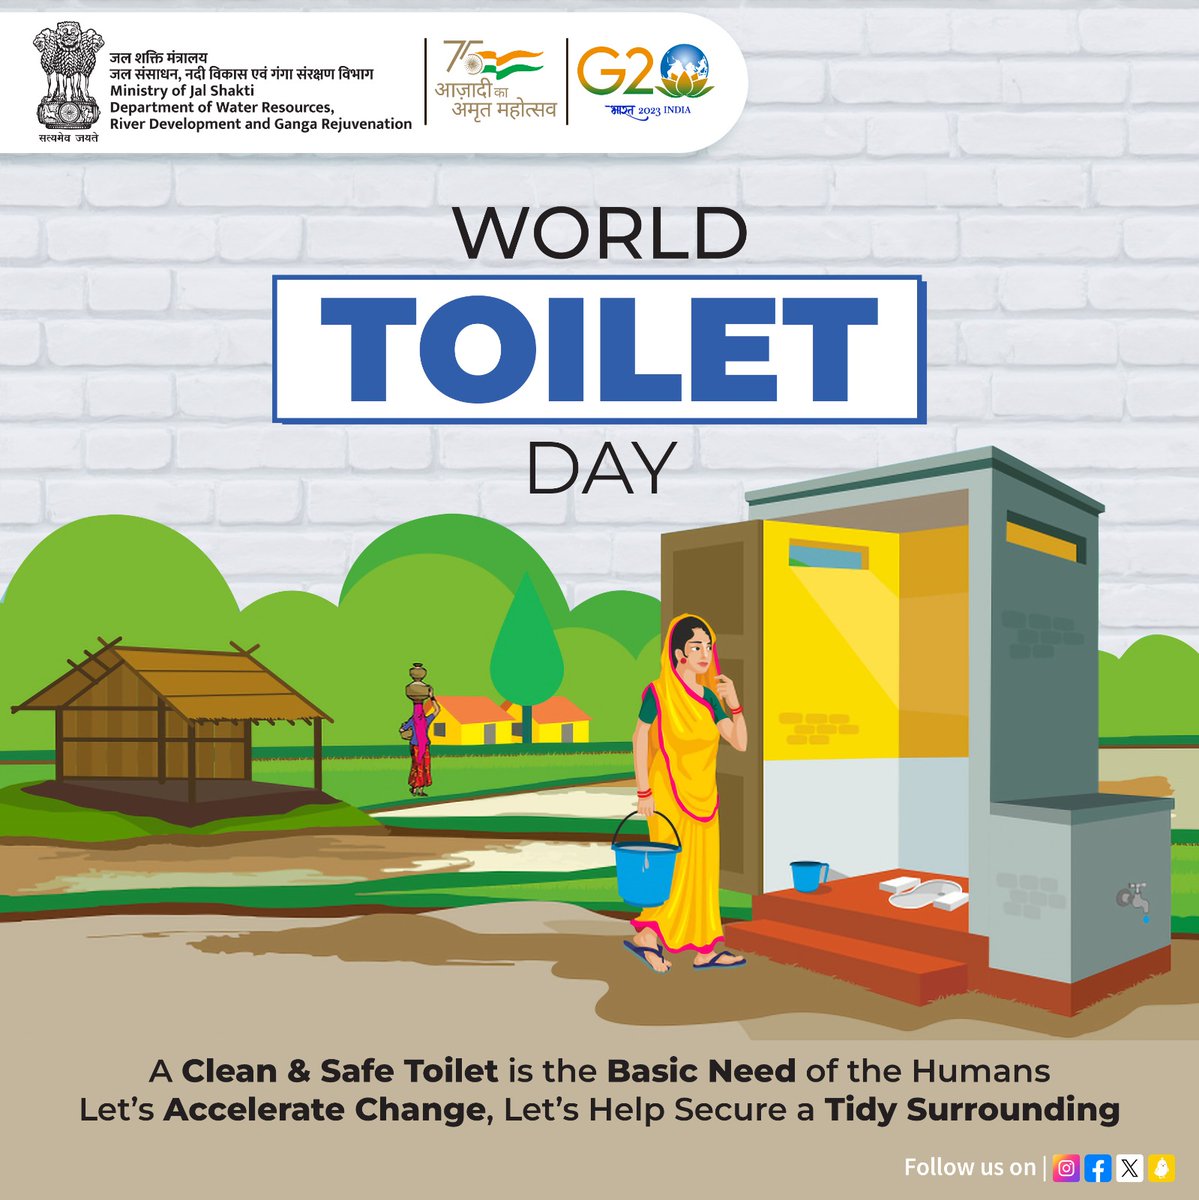 Today, we raise awareness about the importance of proper sanitation & access to clean toilets for everyone. Let's work towards a world where sanitation is a right, not a privilege.
#WorldToiletDay #SanitationForAll #CleanWaterAndSanitation #SwachhsmartToilets #SwachhBharatMission